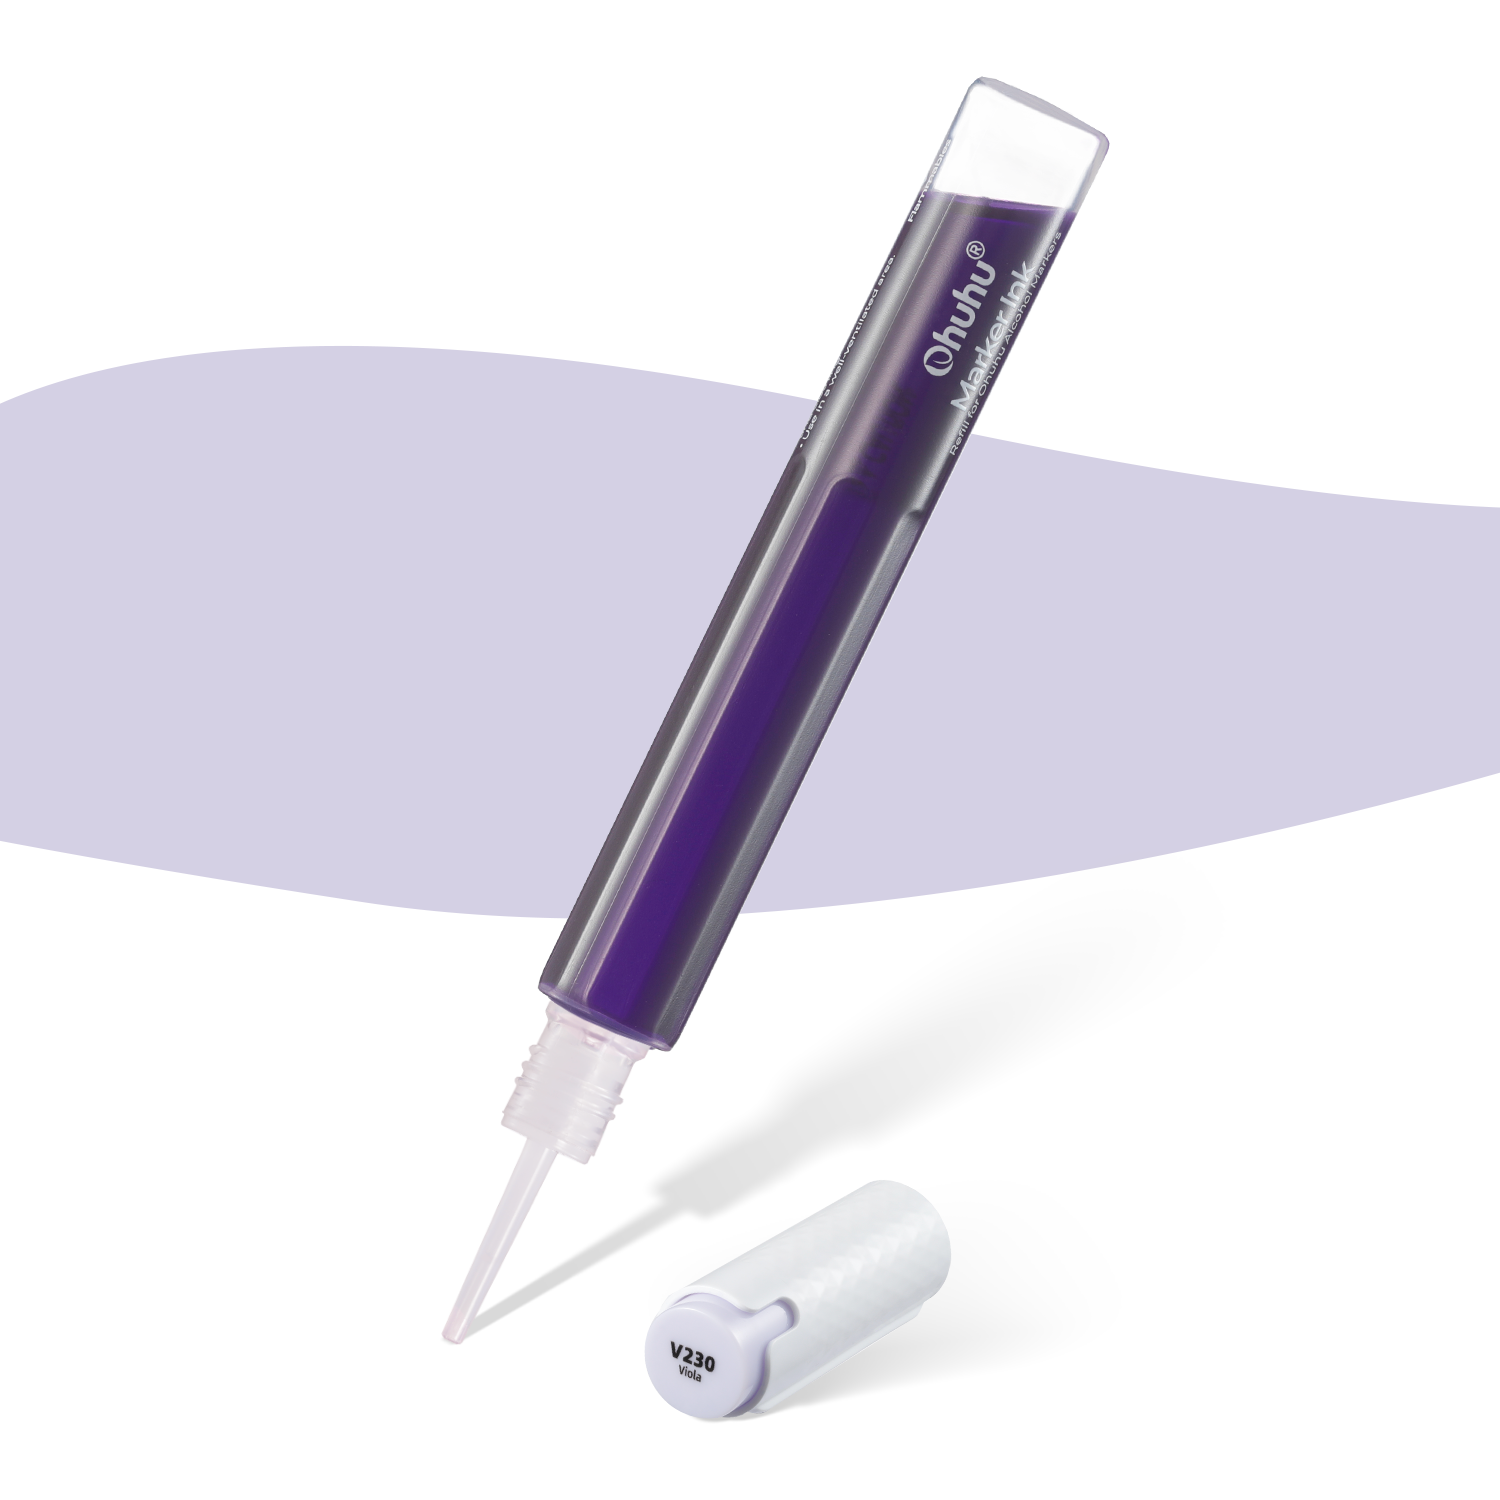 Live - Ohuhu Dual Tip Marker Pens by Juicy Ink